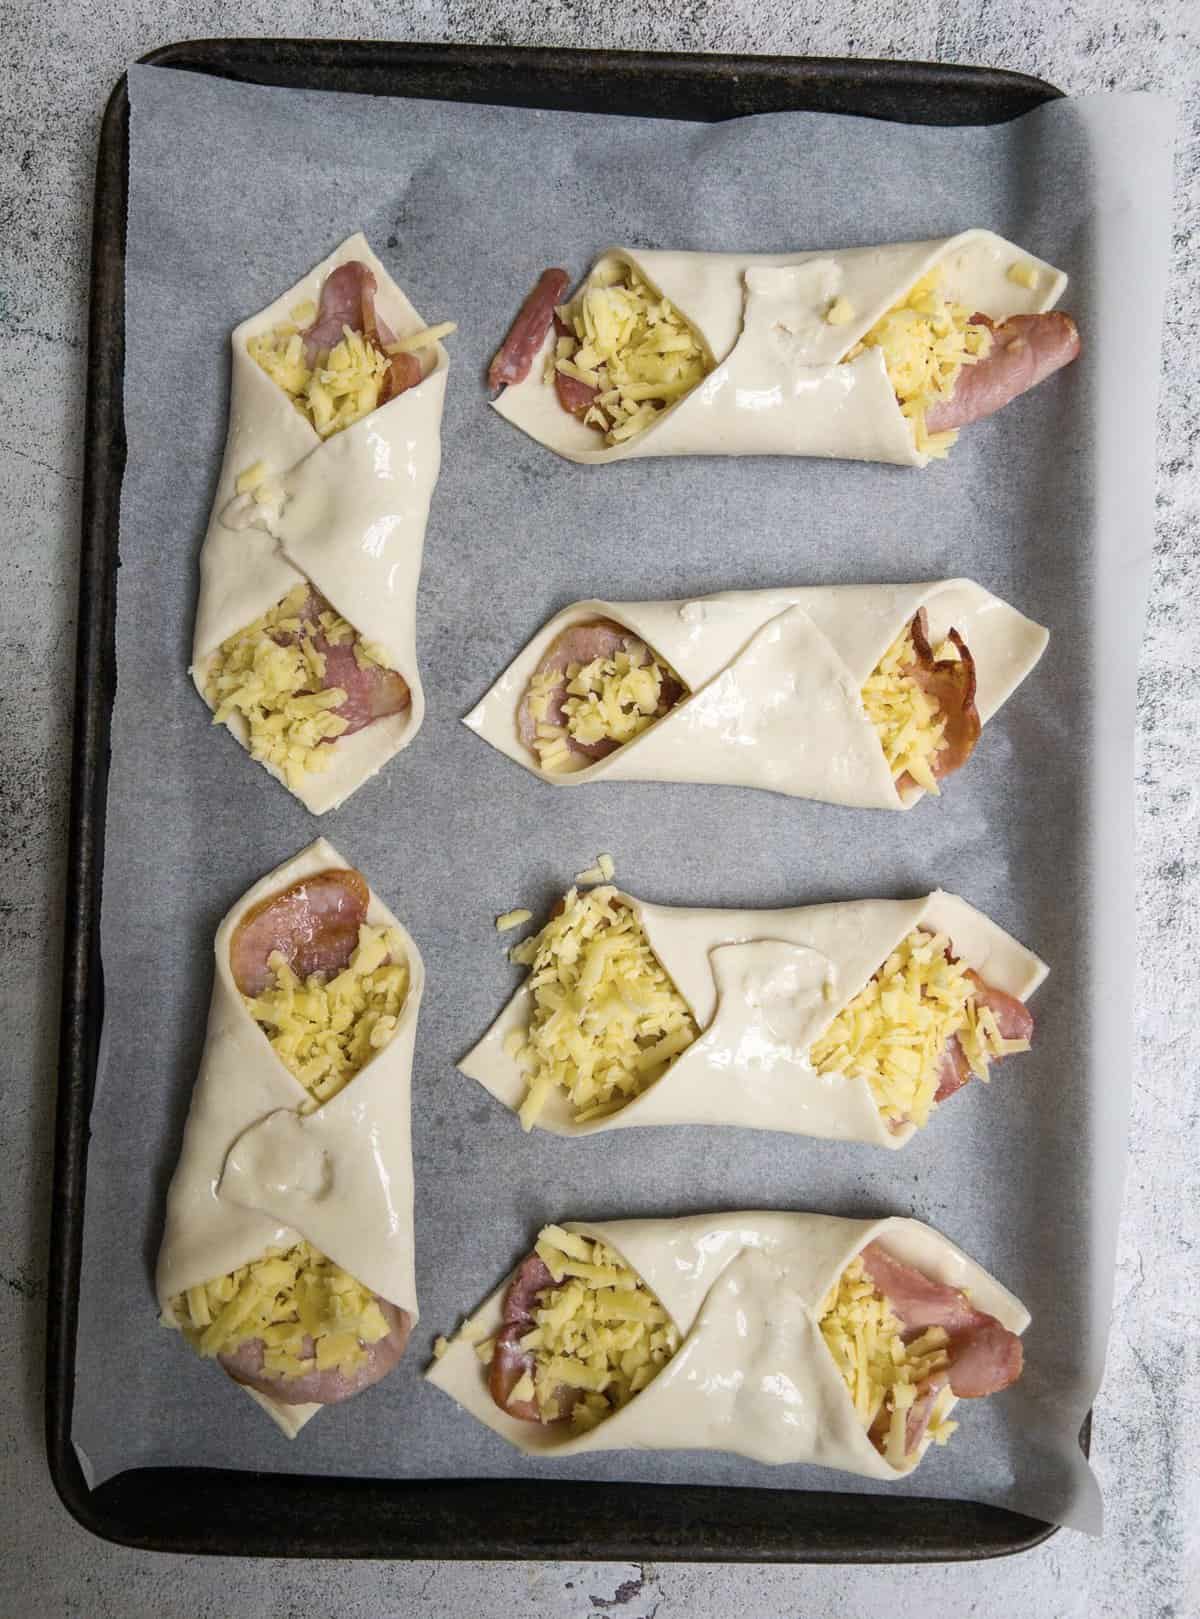 bacon and cheese turnovers on a baking tray uncooked.